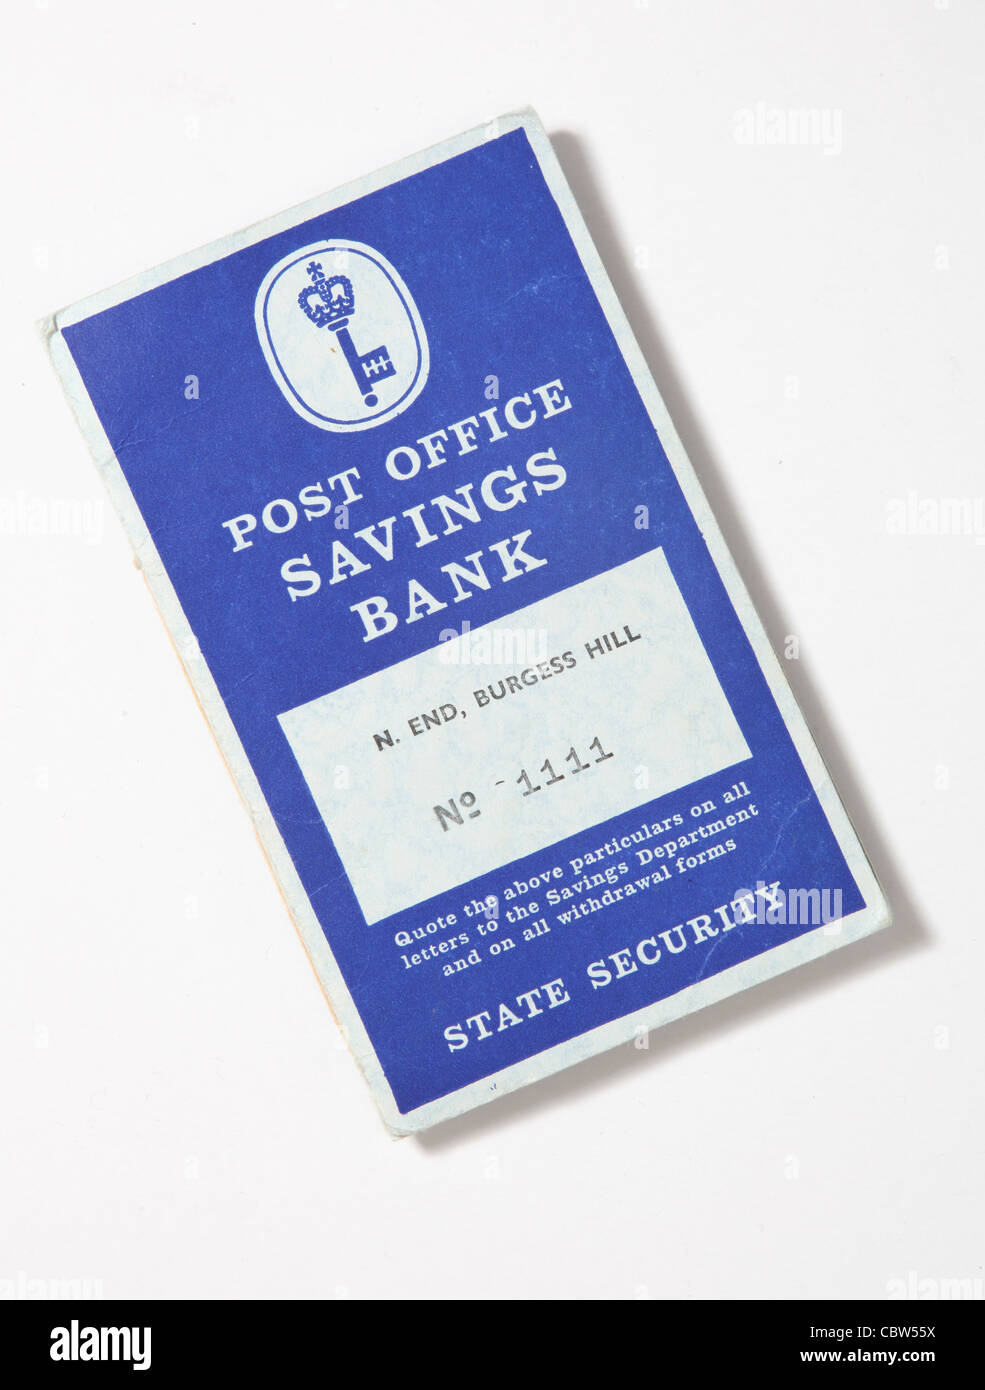 This Post Office Savings Book belonged to my grand-mother, the account was opened originally in 1965. Stock Photo